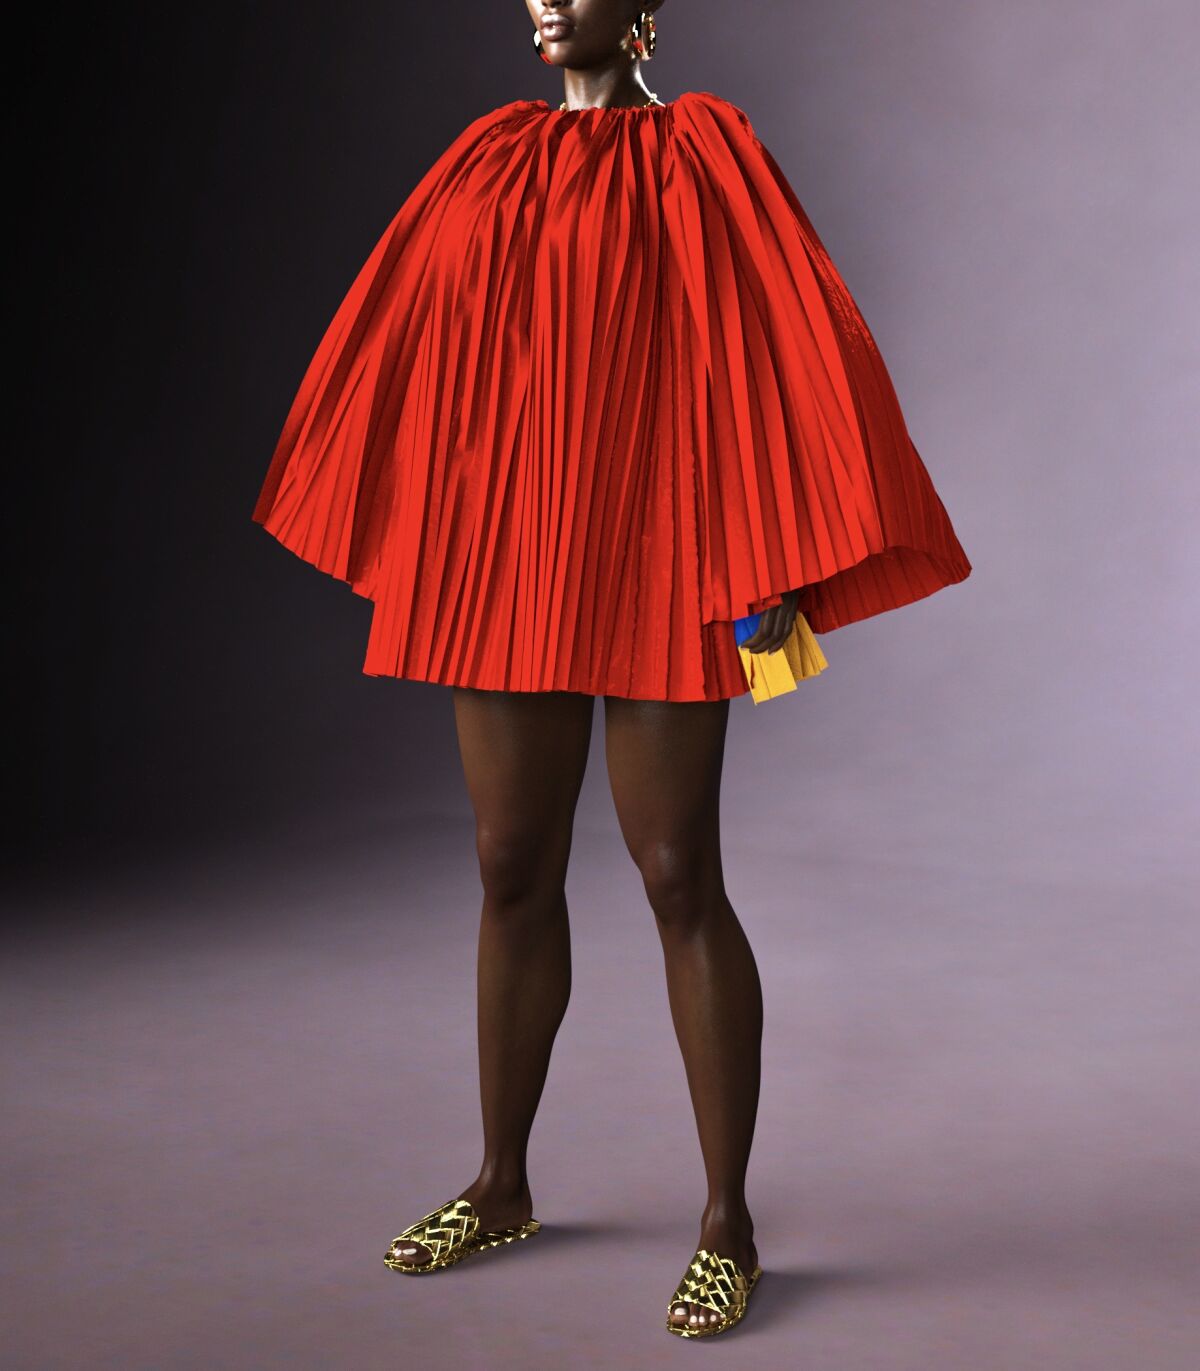 Hanifa's virtually rendered model, Imani, wears the Kinshasa backless mini dress from the Pink Label Congo collection.